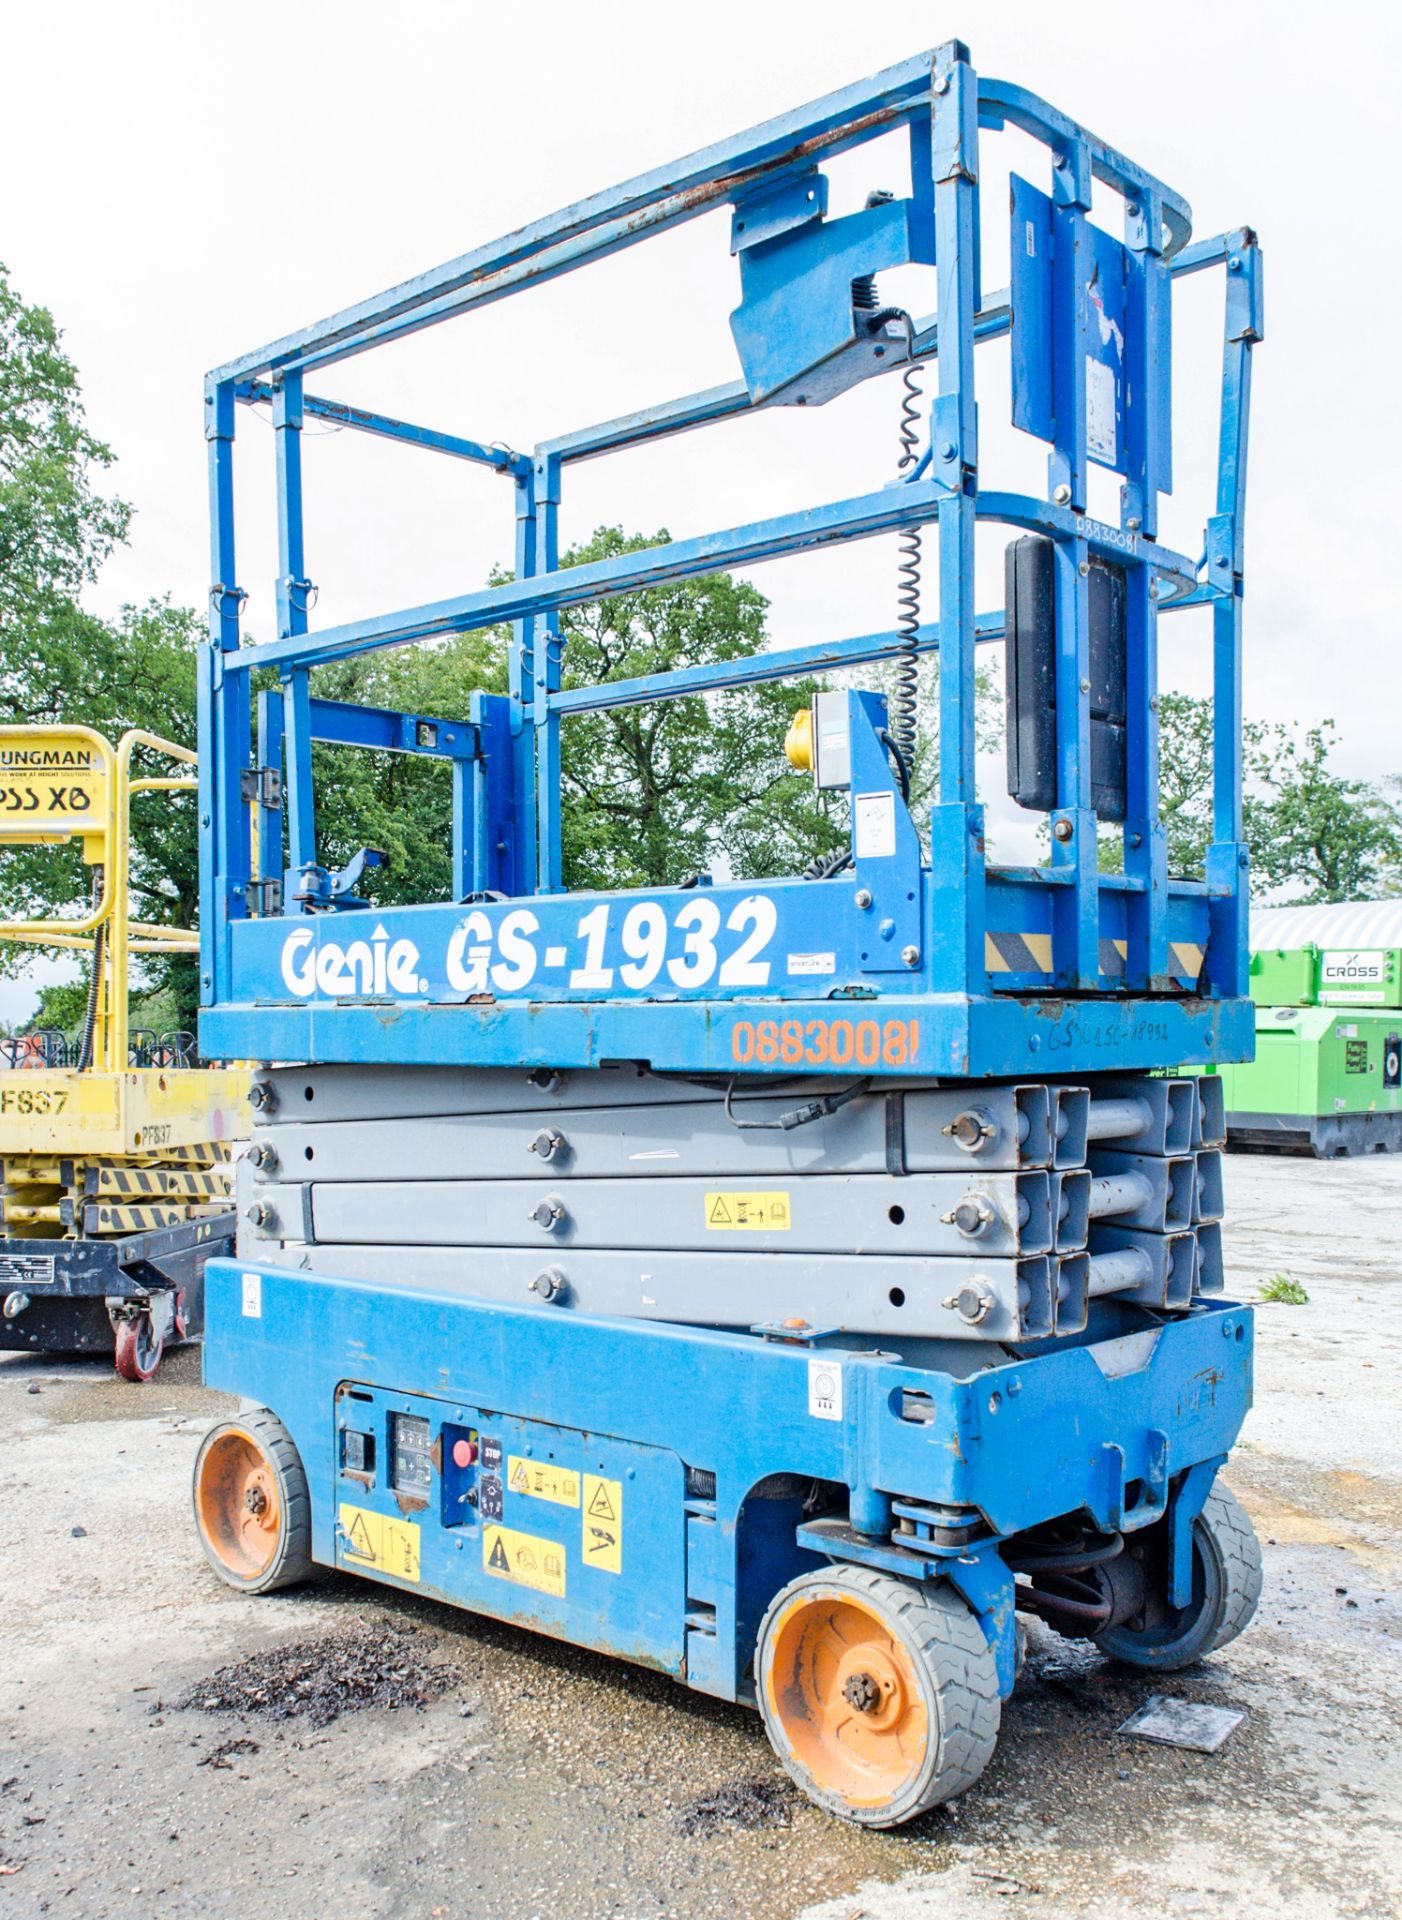 Genie GS1932 battery electric scissor lift access platform Year: 2015 S/N: 18932 Recorded Hours: 109